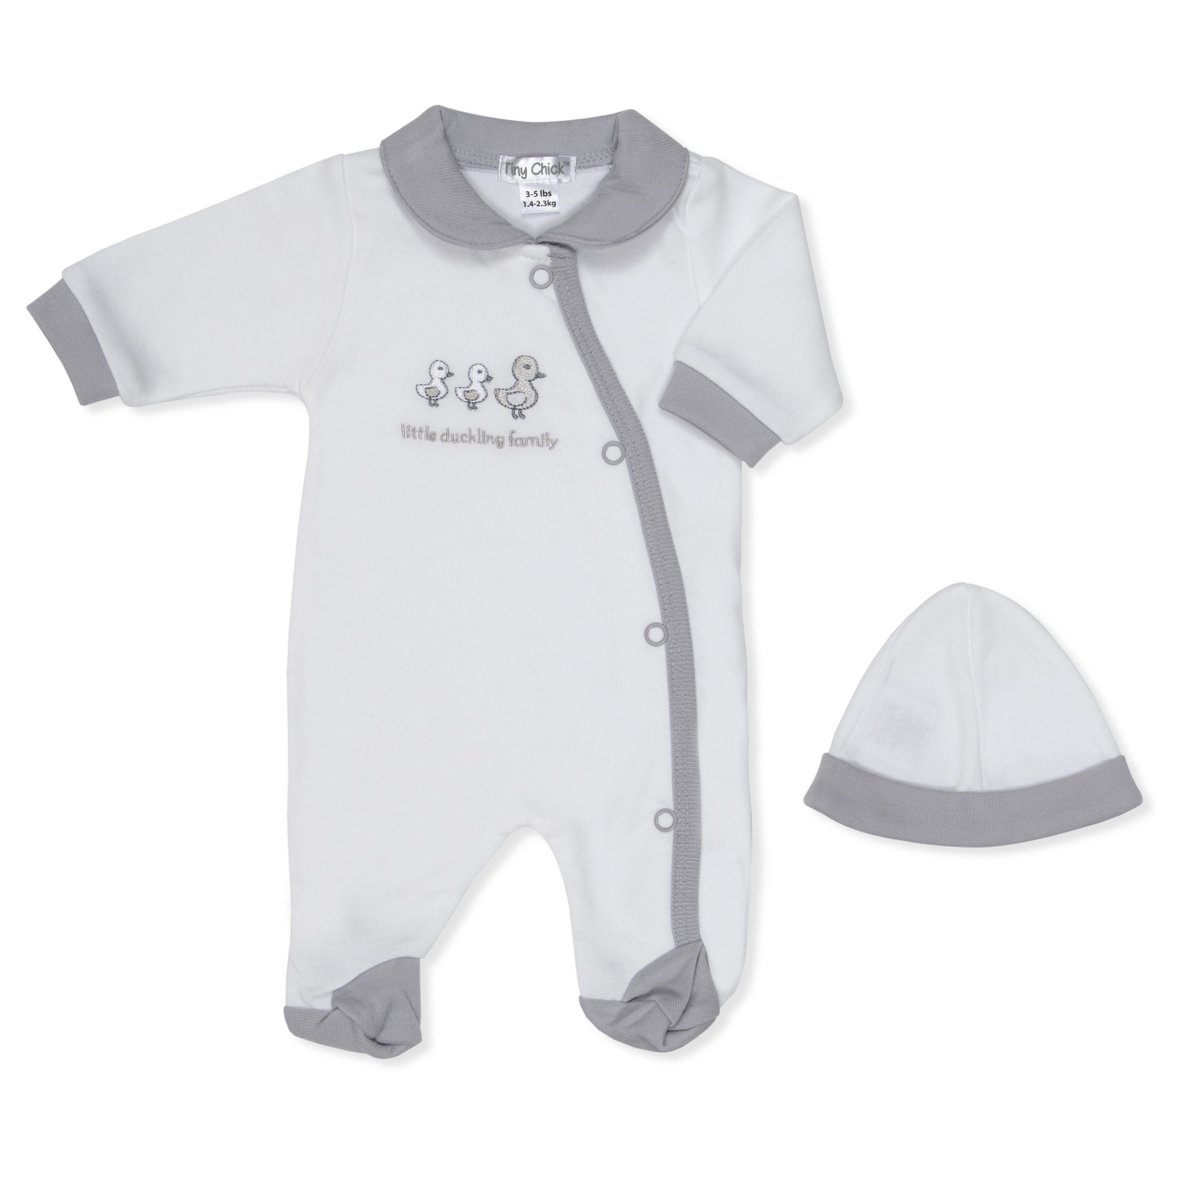 Unisex White Sleepsuit/Babygrow
From @mummyandtheos for £12.50
White in overall colour – embroidered with grey/silver ‘Little Duckling Family’ on the front. Comes with hat.
70% Polyester 30% Cotton
Sizes: 
Size 1. 3lbs – 5lbs 
Size 2. 5lbs – 8lbs
mummyandtheos.co.uk/product/unisex…